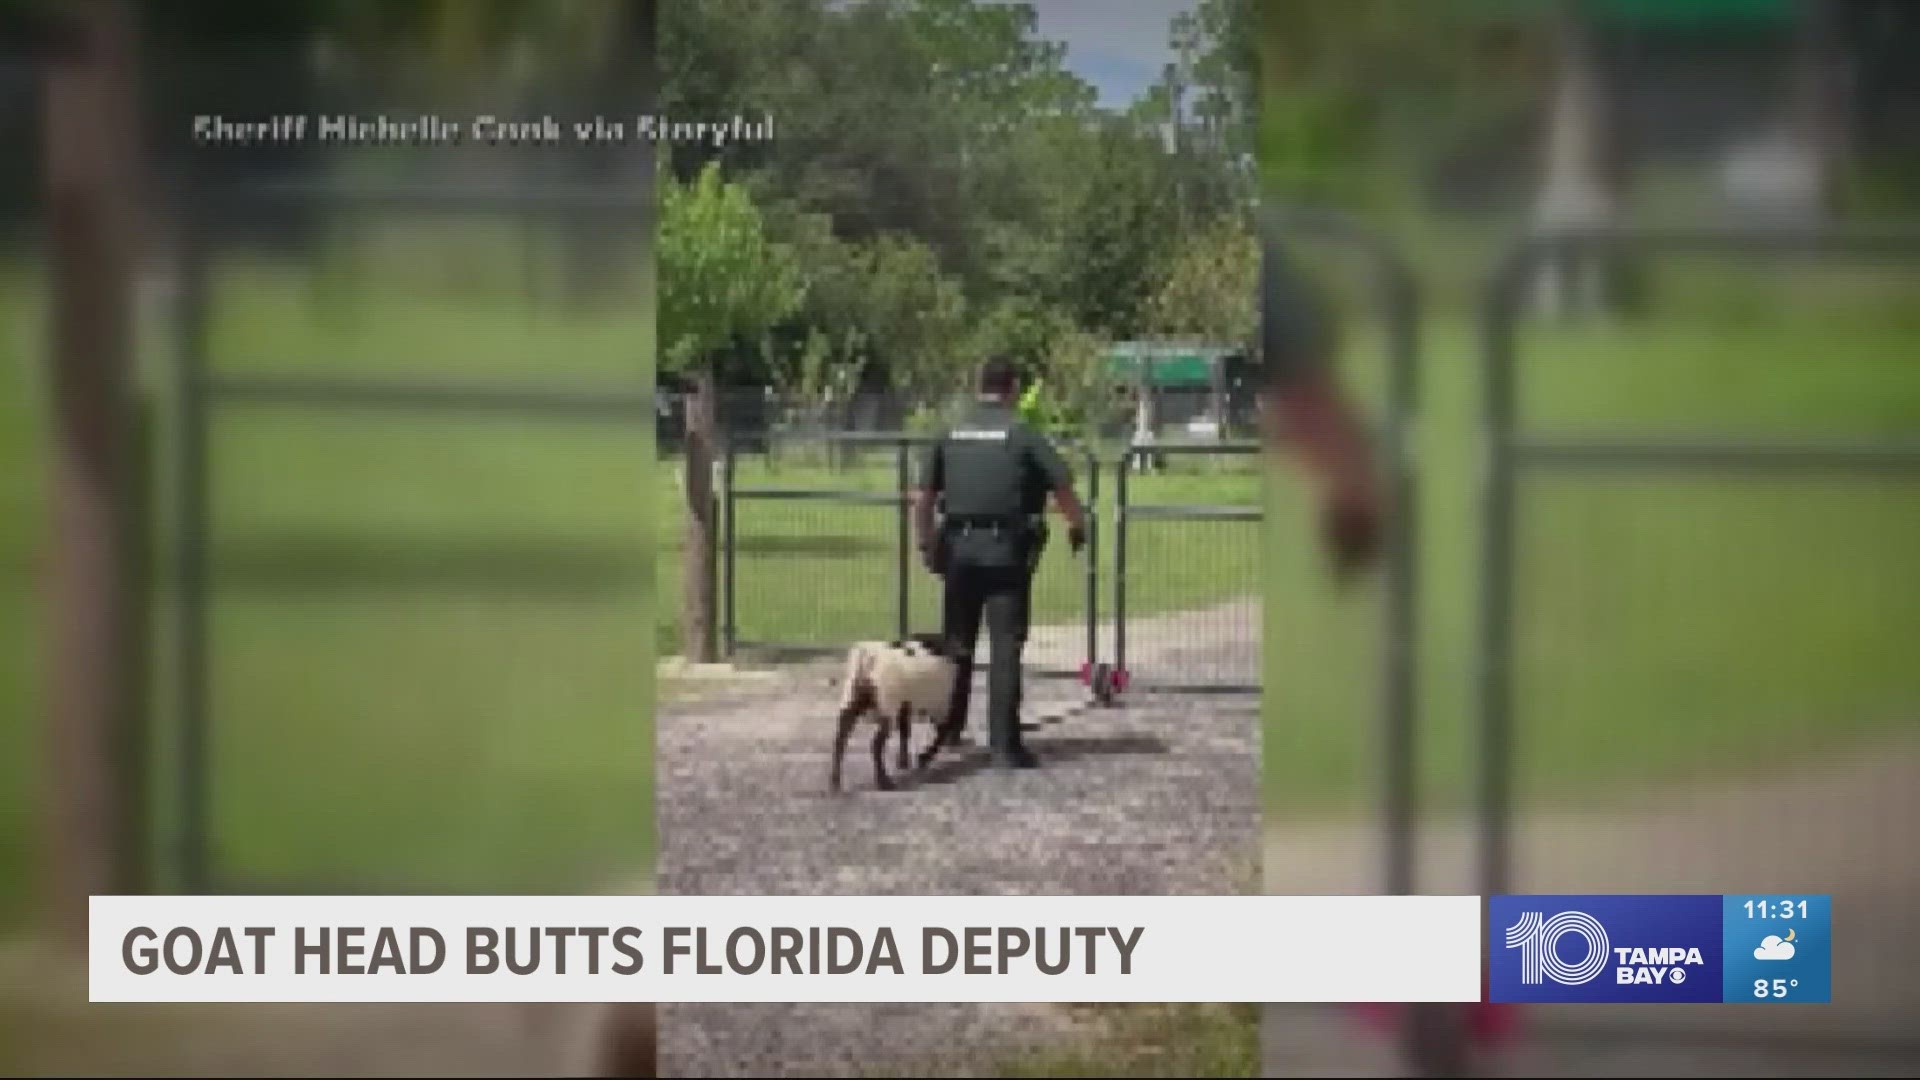 In the video, the deputy can be heard saying, "Ouch," as the goat head-butts him on his backside, but then laughs it off.